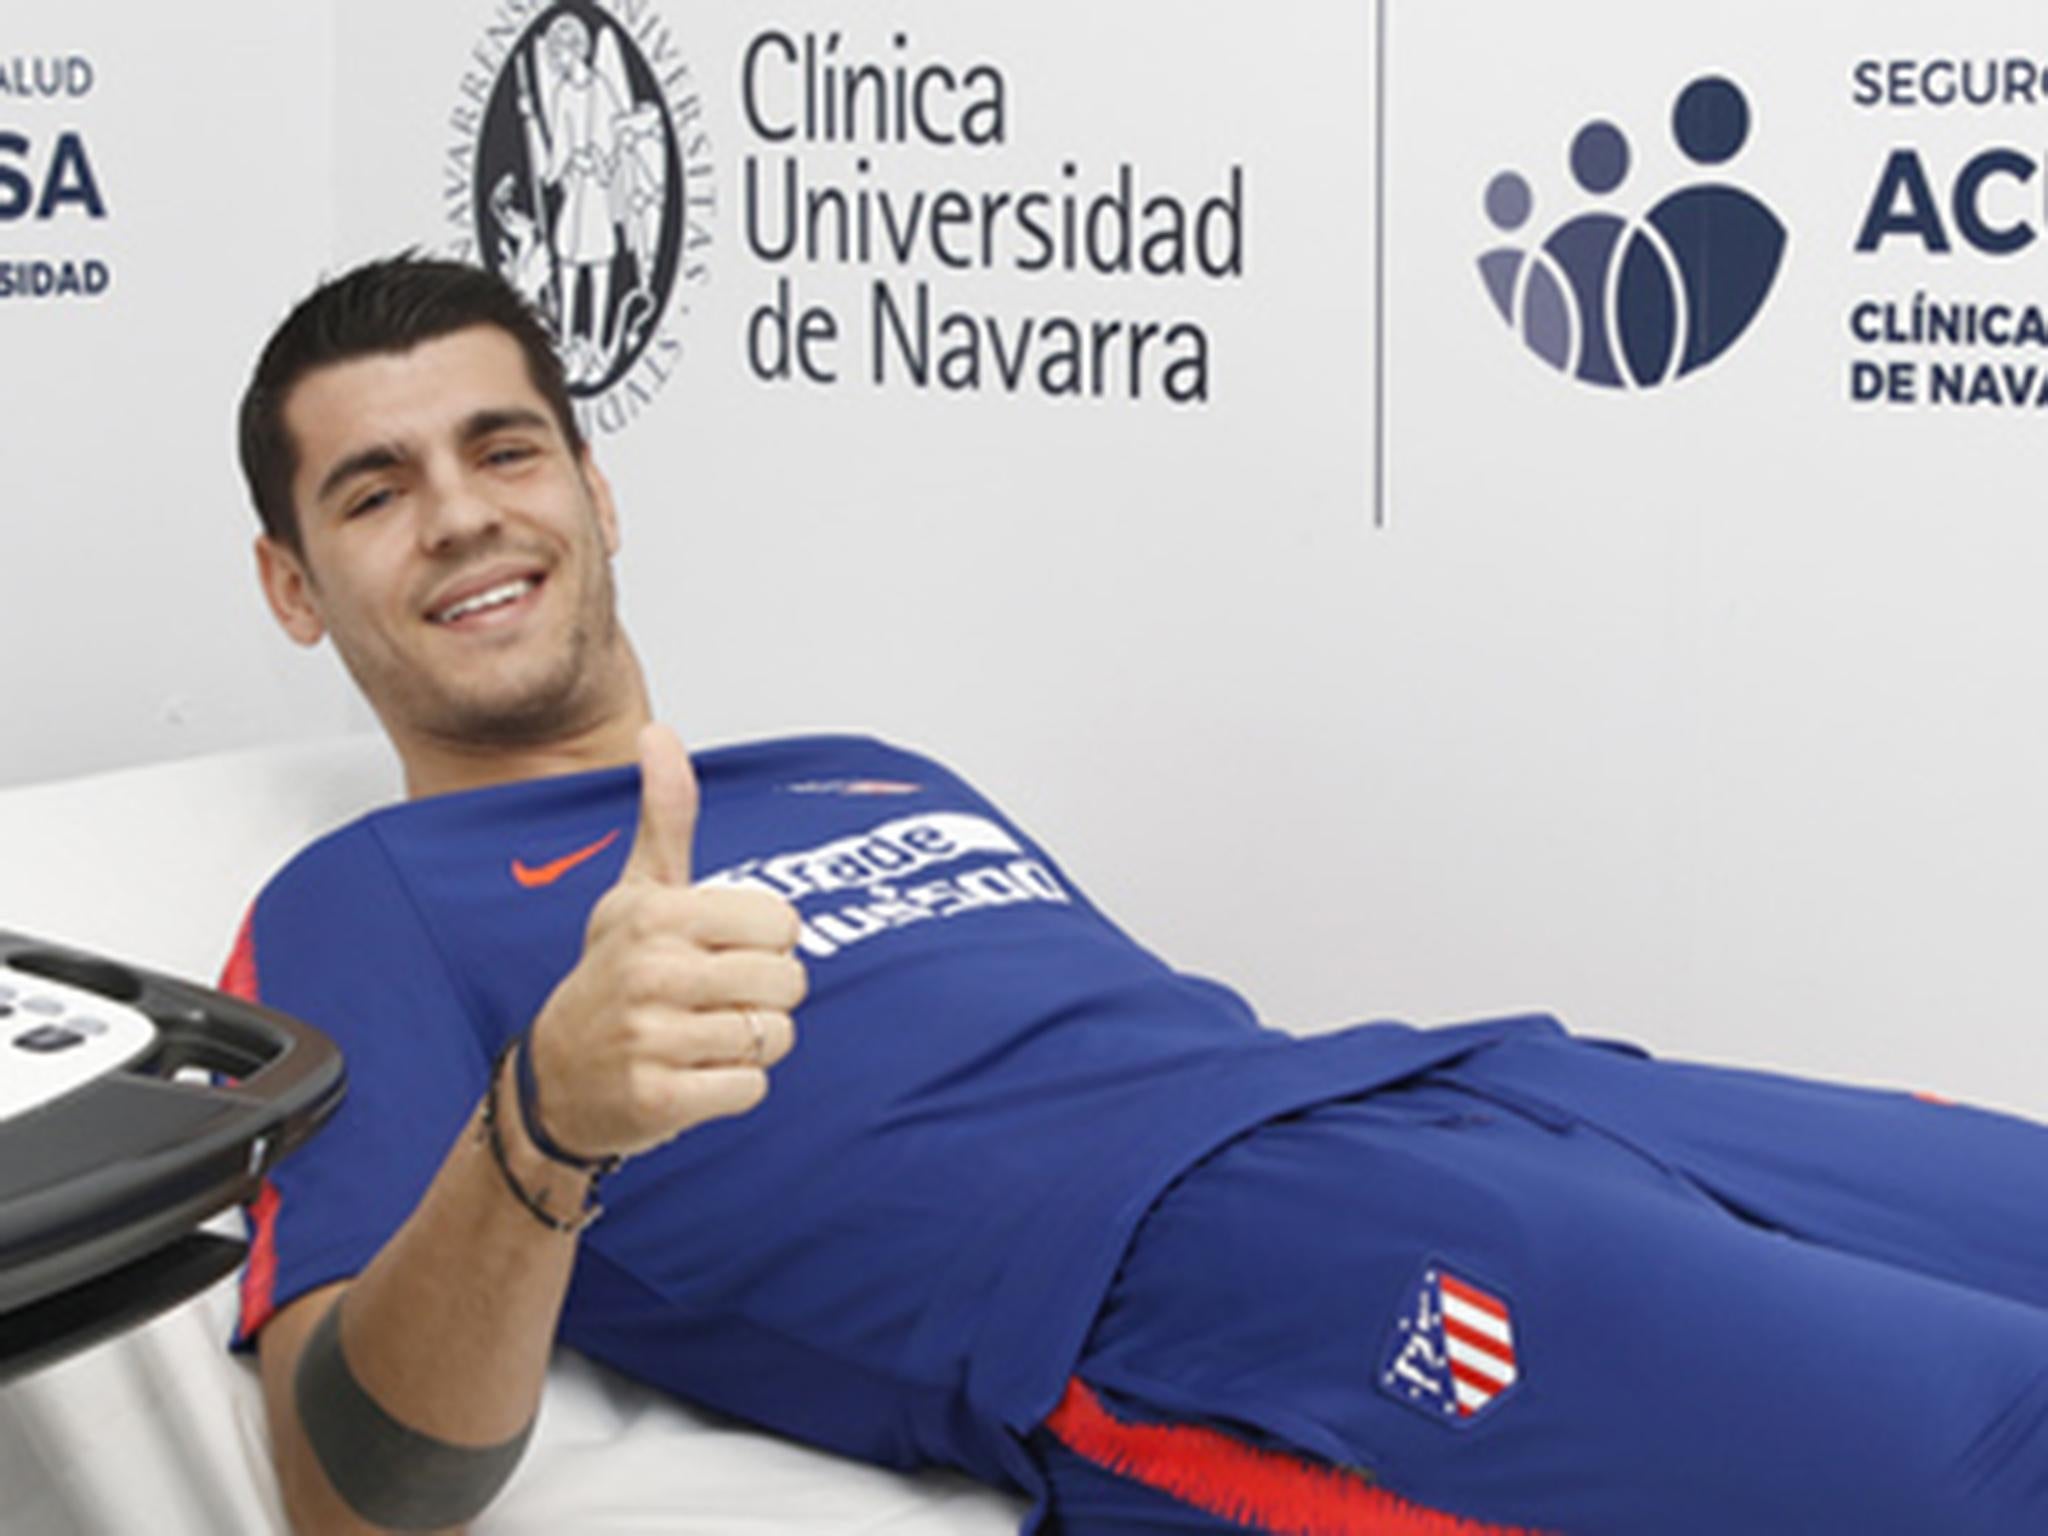 Alvaro Morata agreed an 18-month loan deal with Atletico Madrid